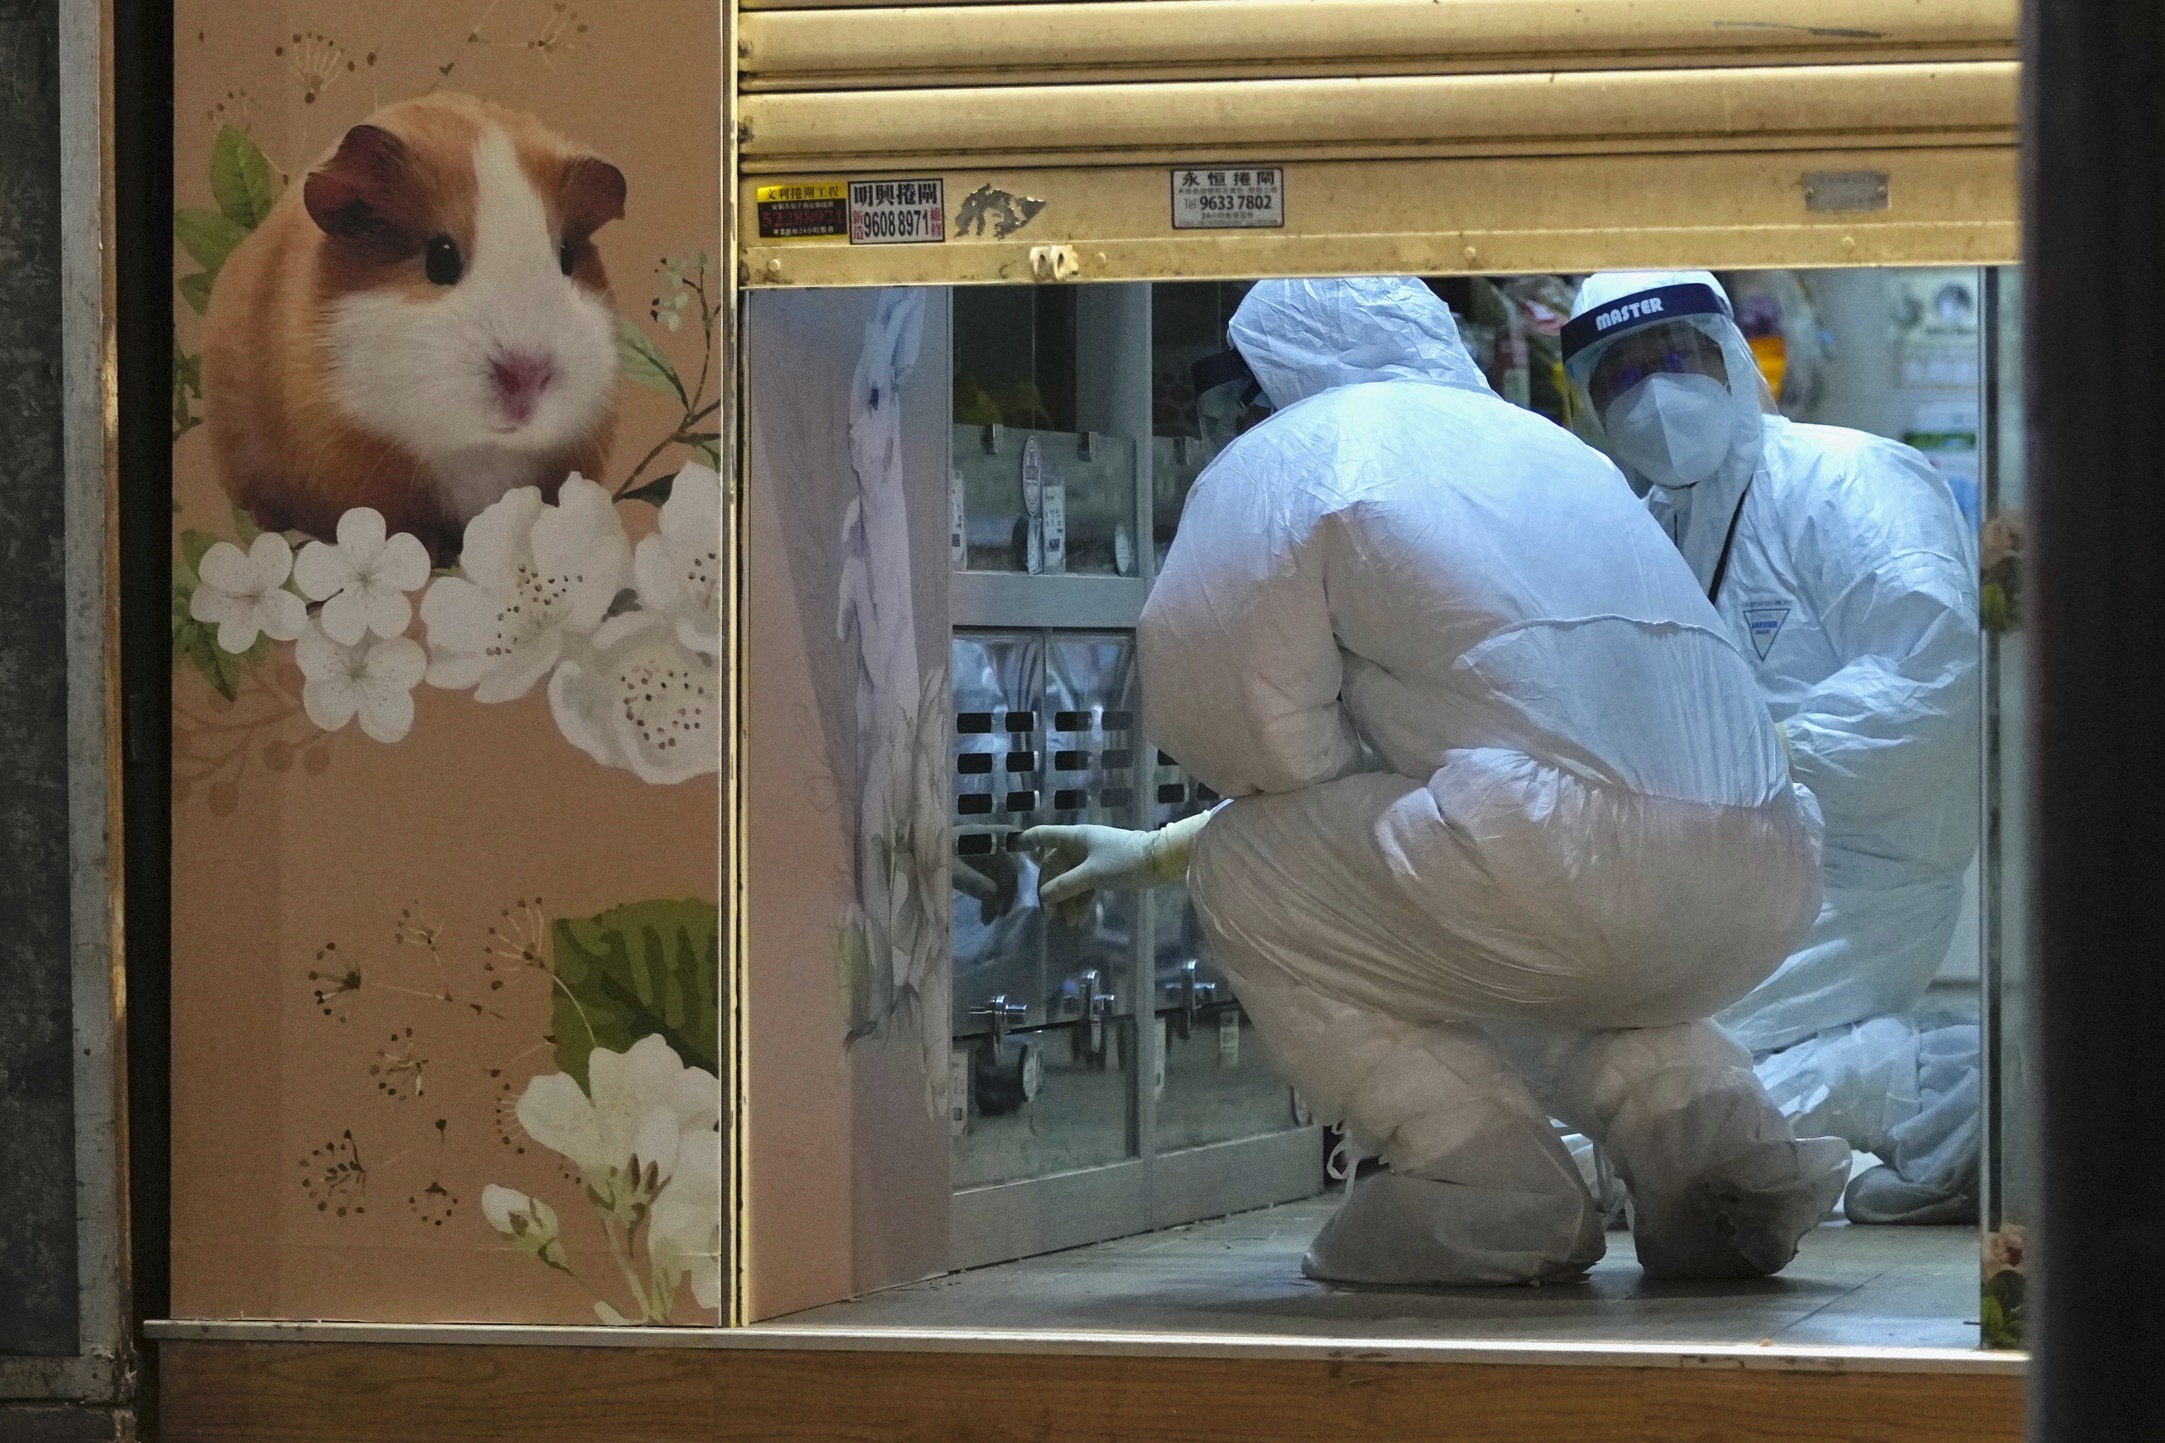 Staff members from the Agriculture, Fisheries and Conservation Department investigate a pet shop in Hong Kong, Tuesday, January 18, 2022, which closed after some pet hamsters tested positive for the coronavirus, according to authorities.  